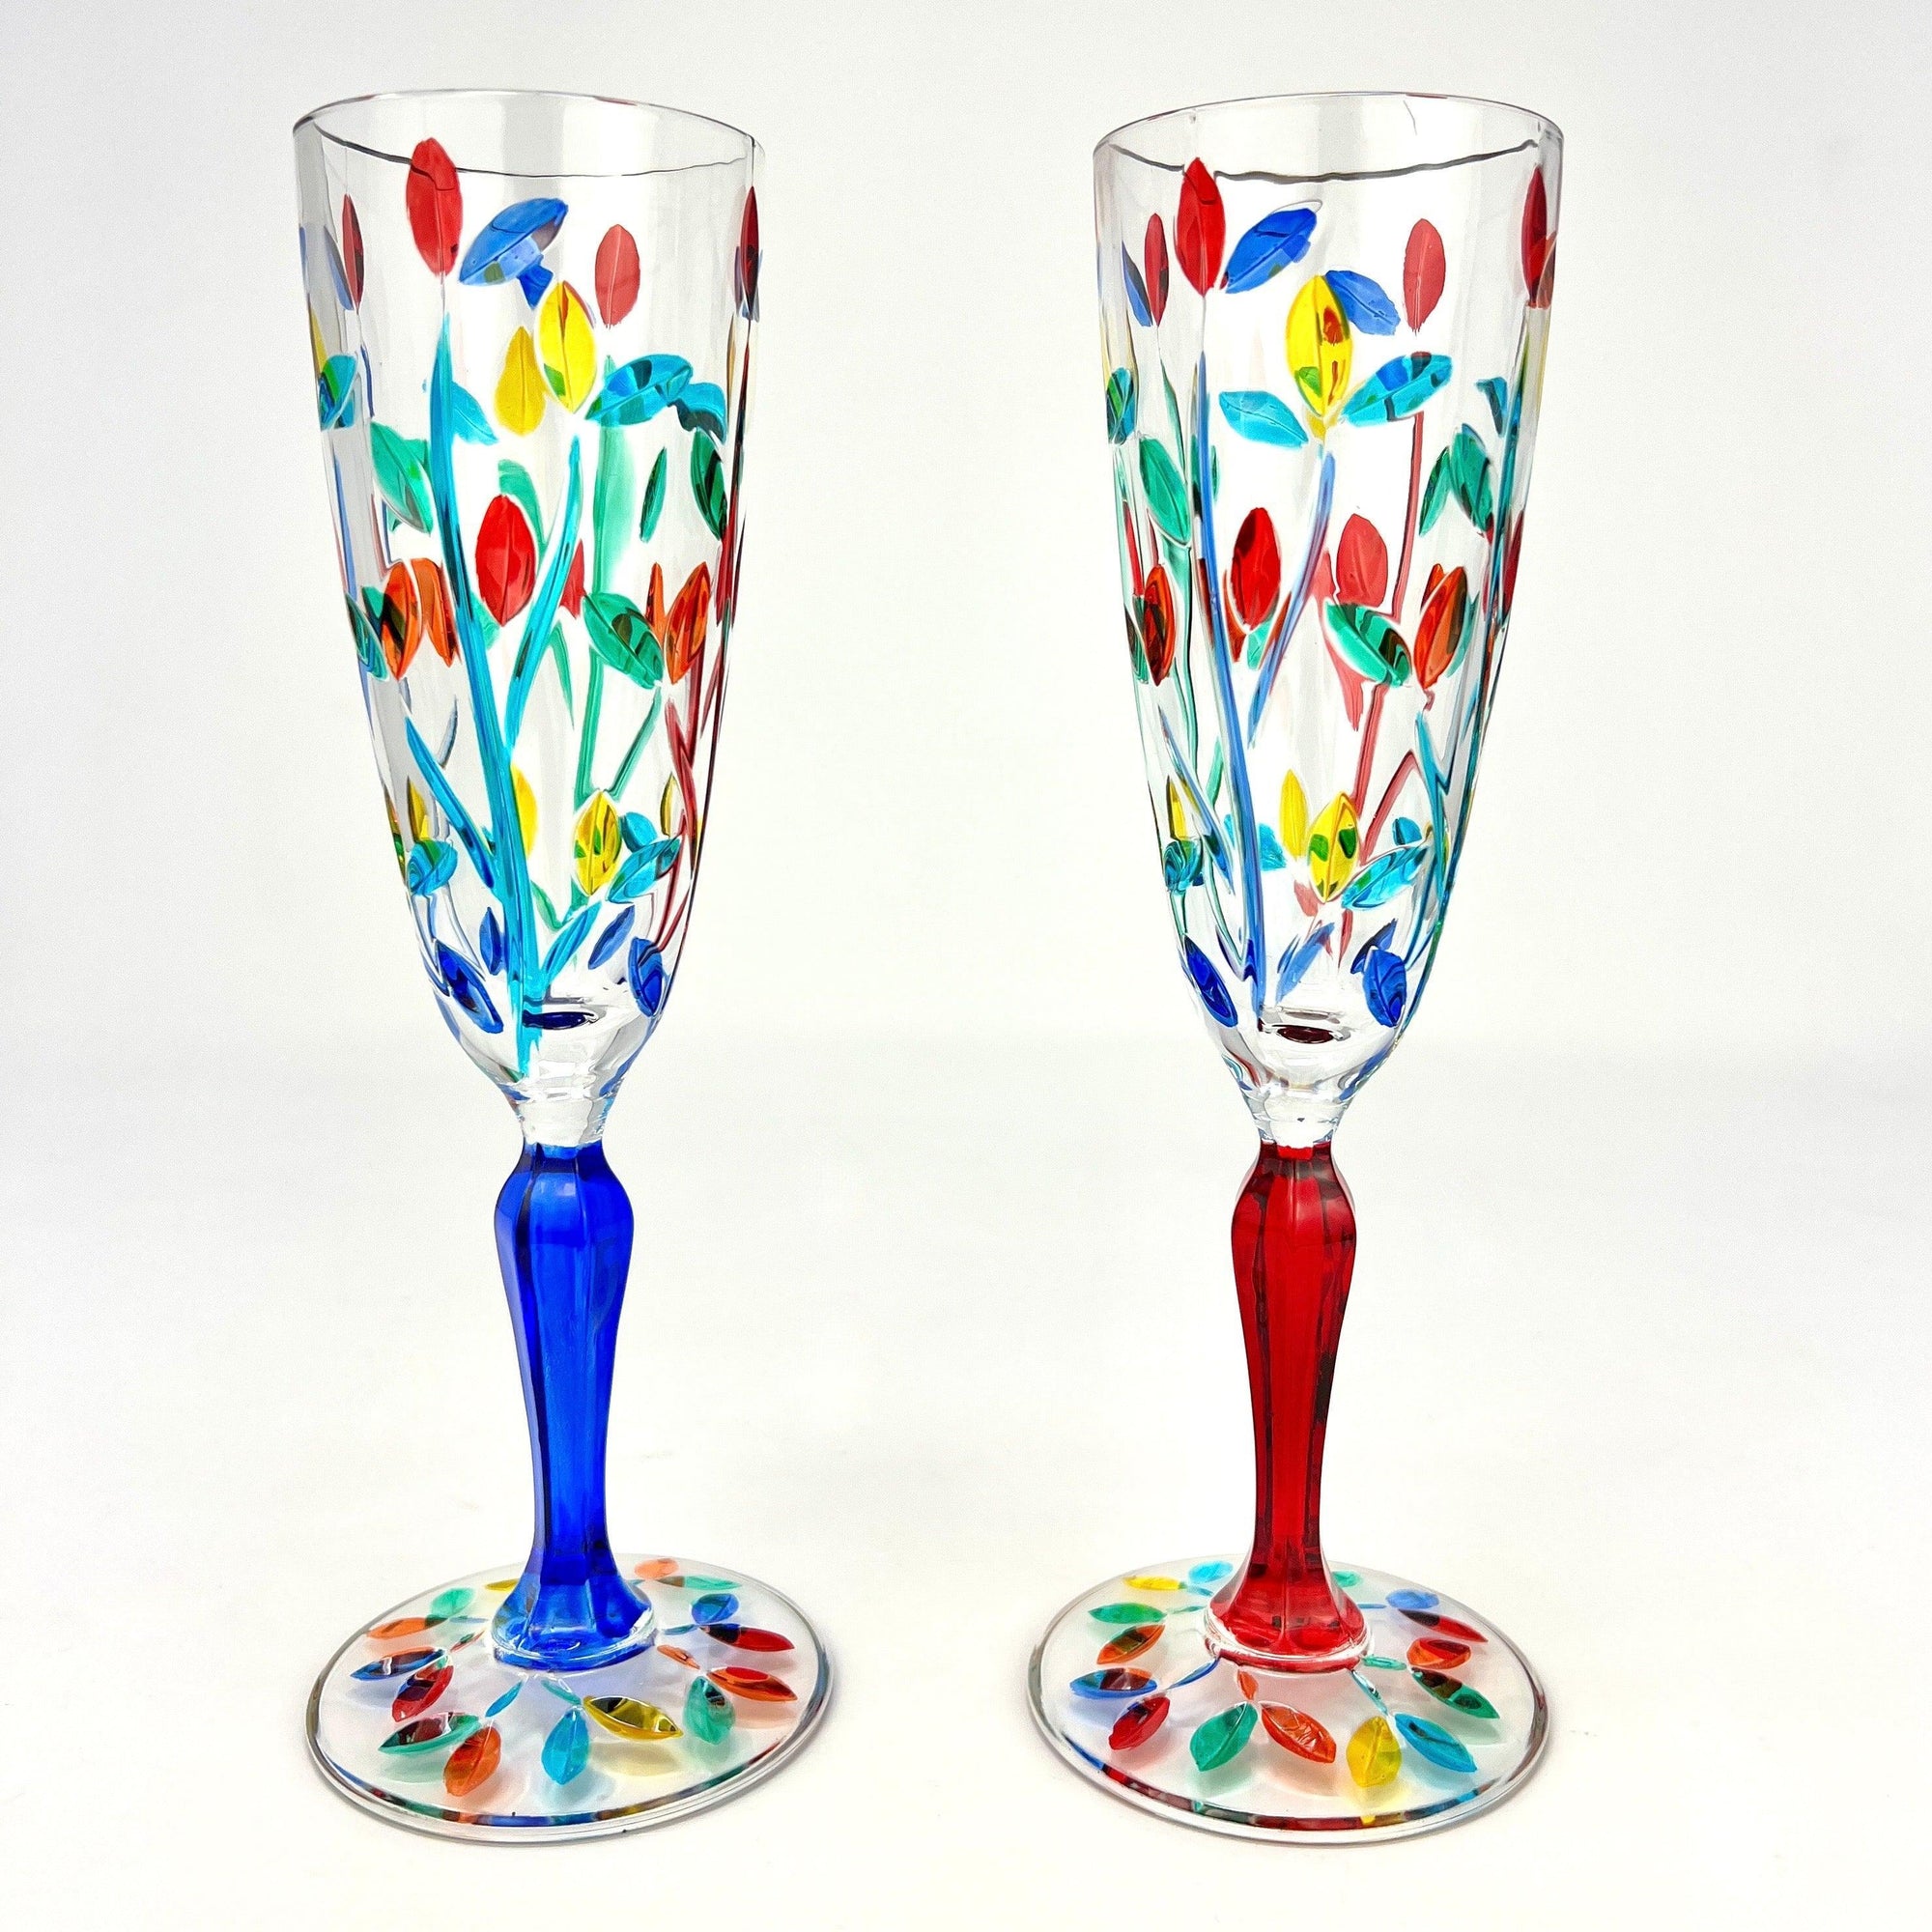 Flowervine Champagne Glasses, Set of 2, Made in Italy at MyItalianDecor